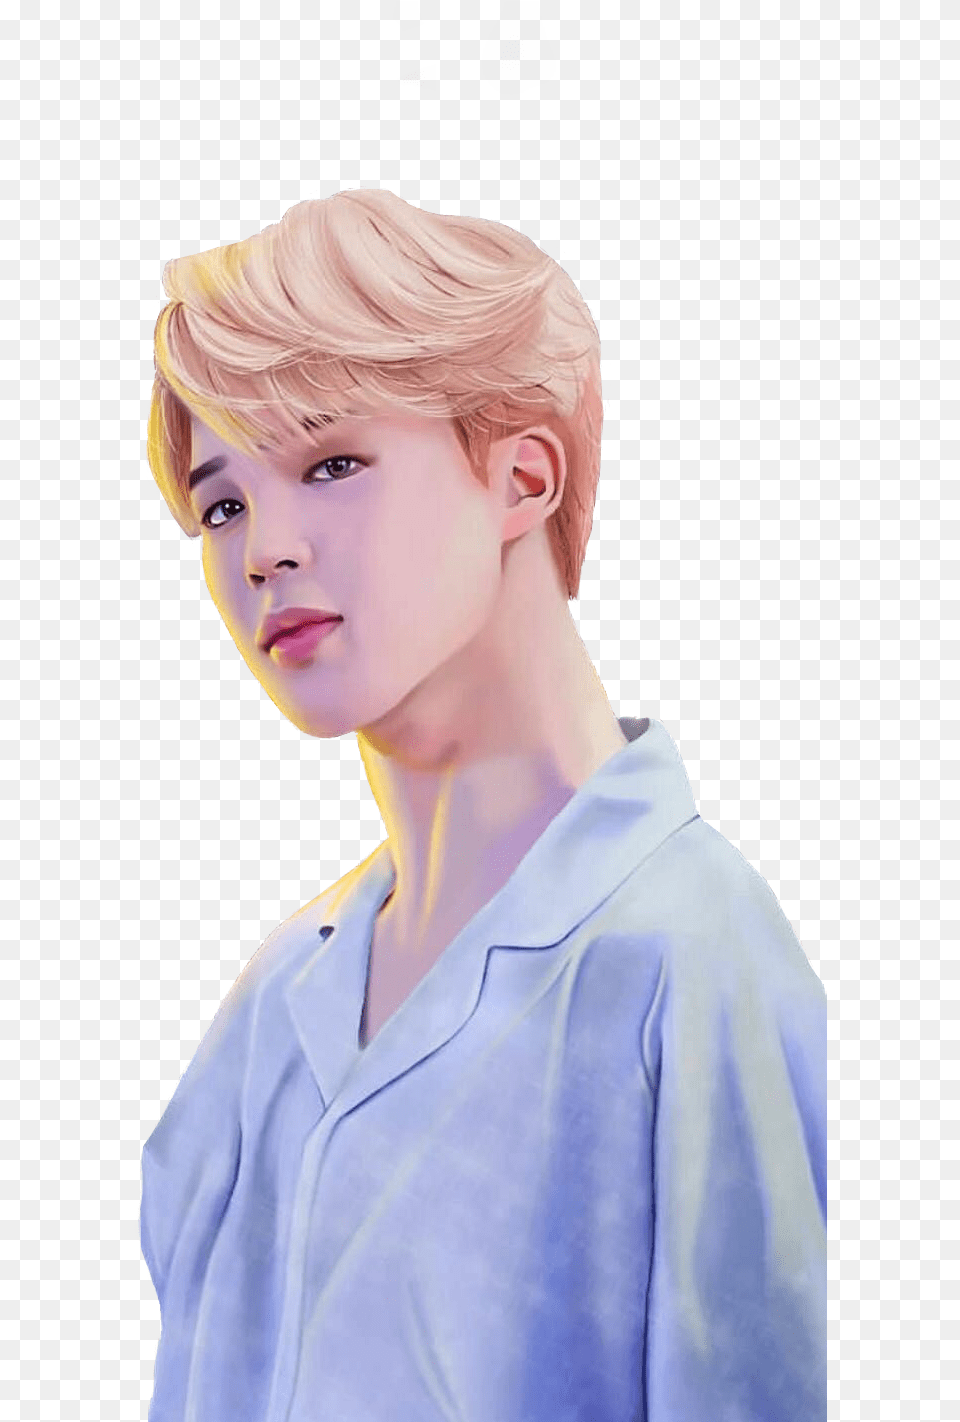 Don T Copy Or Use It Without The Source I Don Jimin Fanart, Blonde, Boy, Hair, Male Png